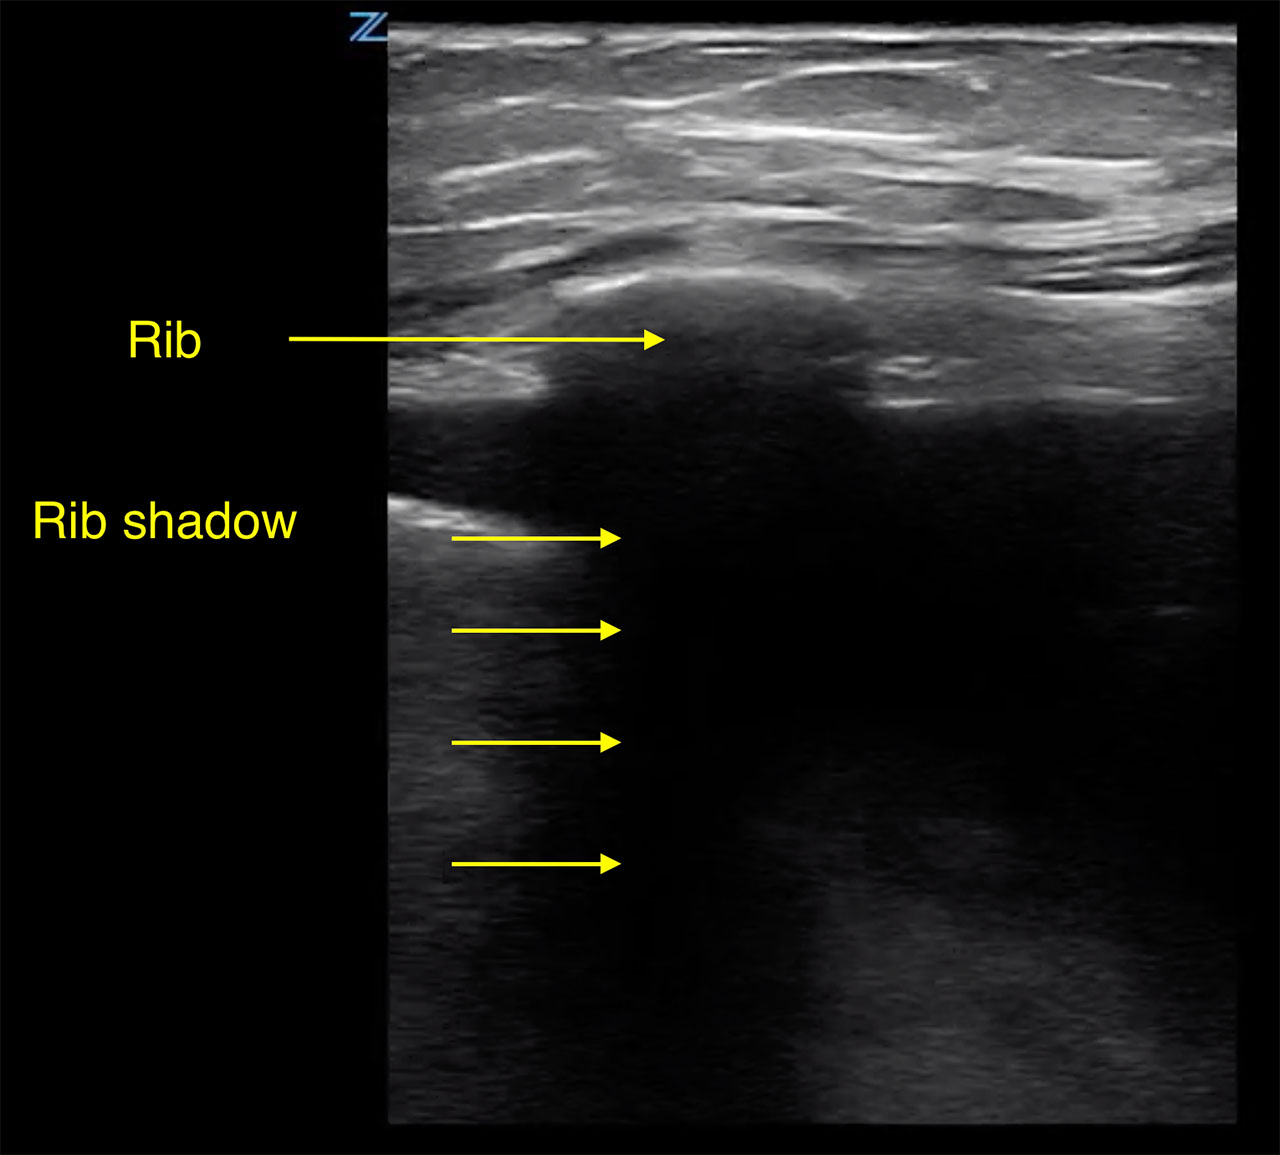 Thoracentesis Figure 4 - Pleural effusion with rib shadow. The transducer is placed perpendicular to the _rZki.jpg